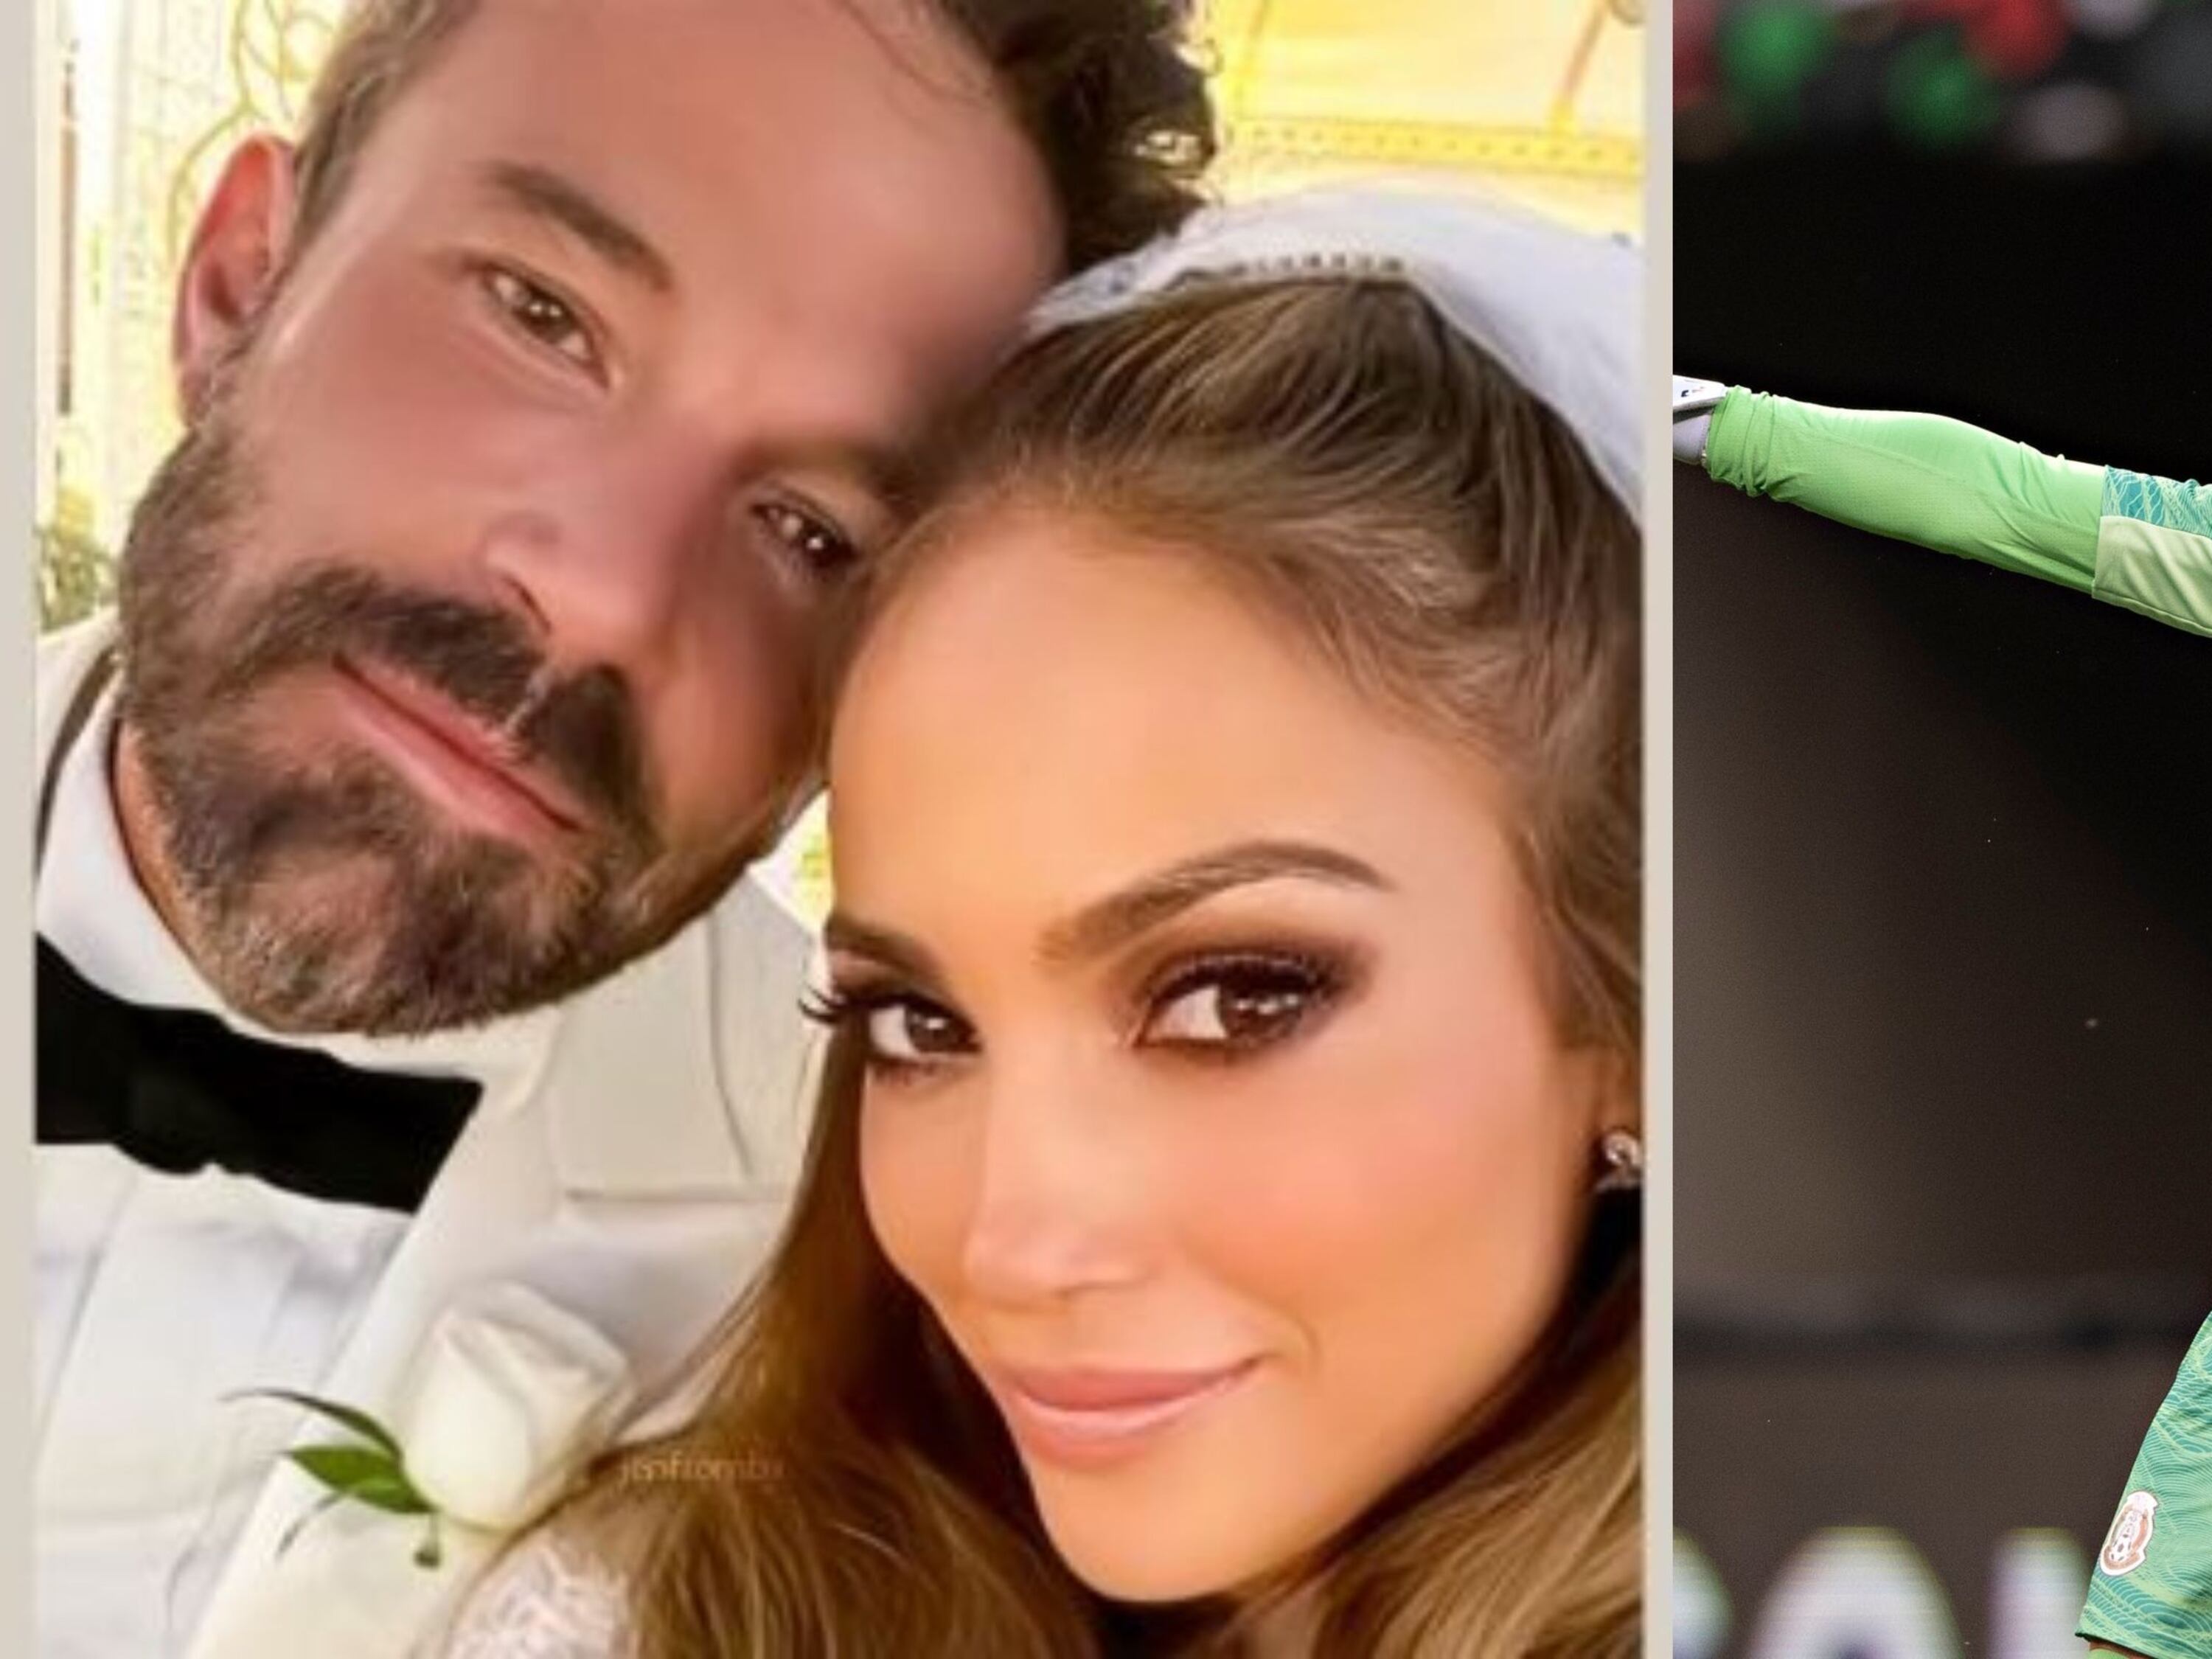 While Ben Affleck and Jennifer Lopez didn't spend on their wedding, Ochoa's latest luxury